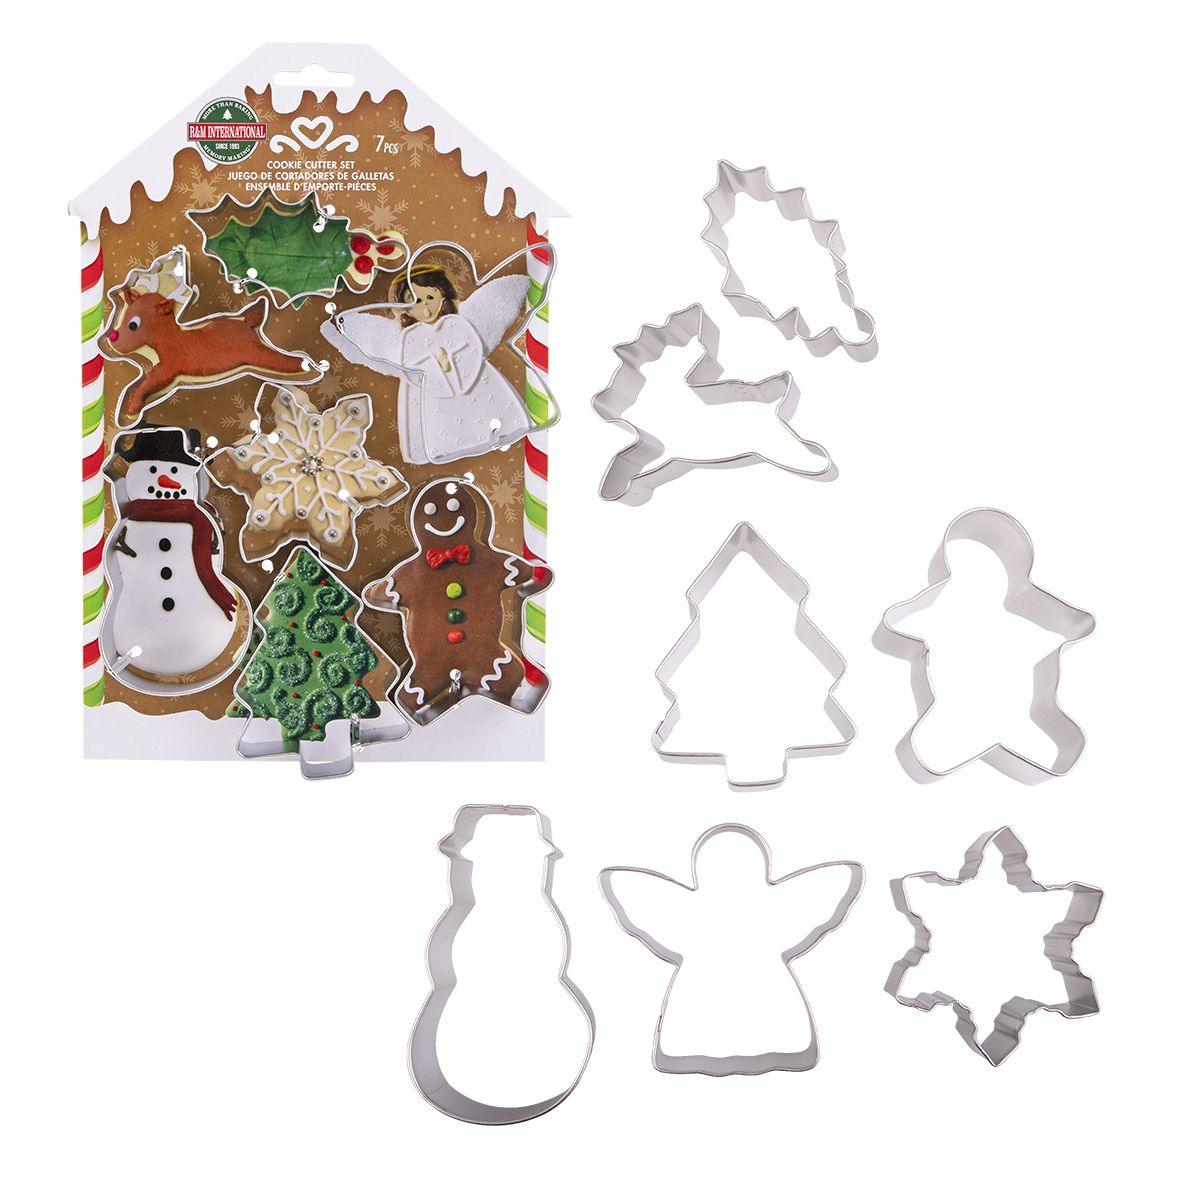 CHRISTMAS COOKIE CUTTER SET OF 7 - Cake Decorating Central